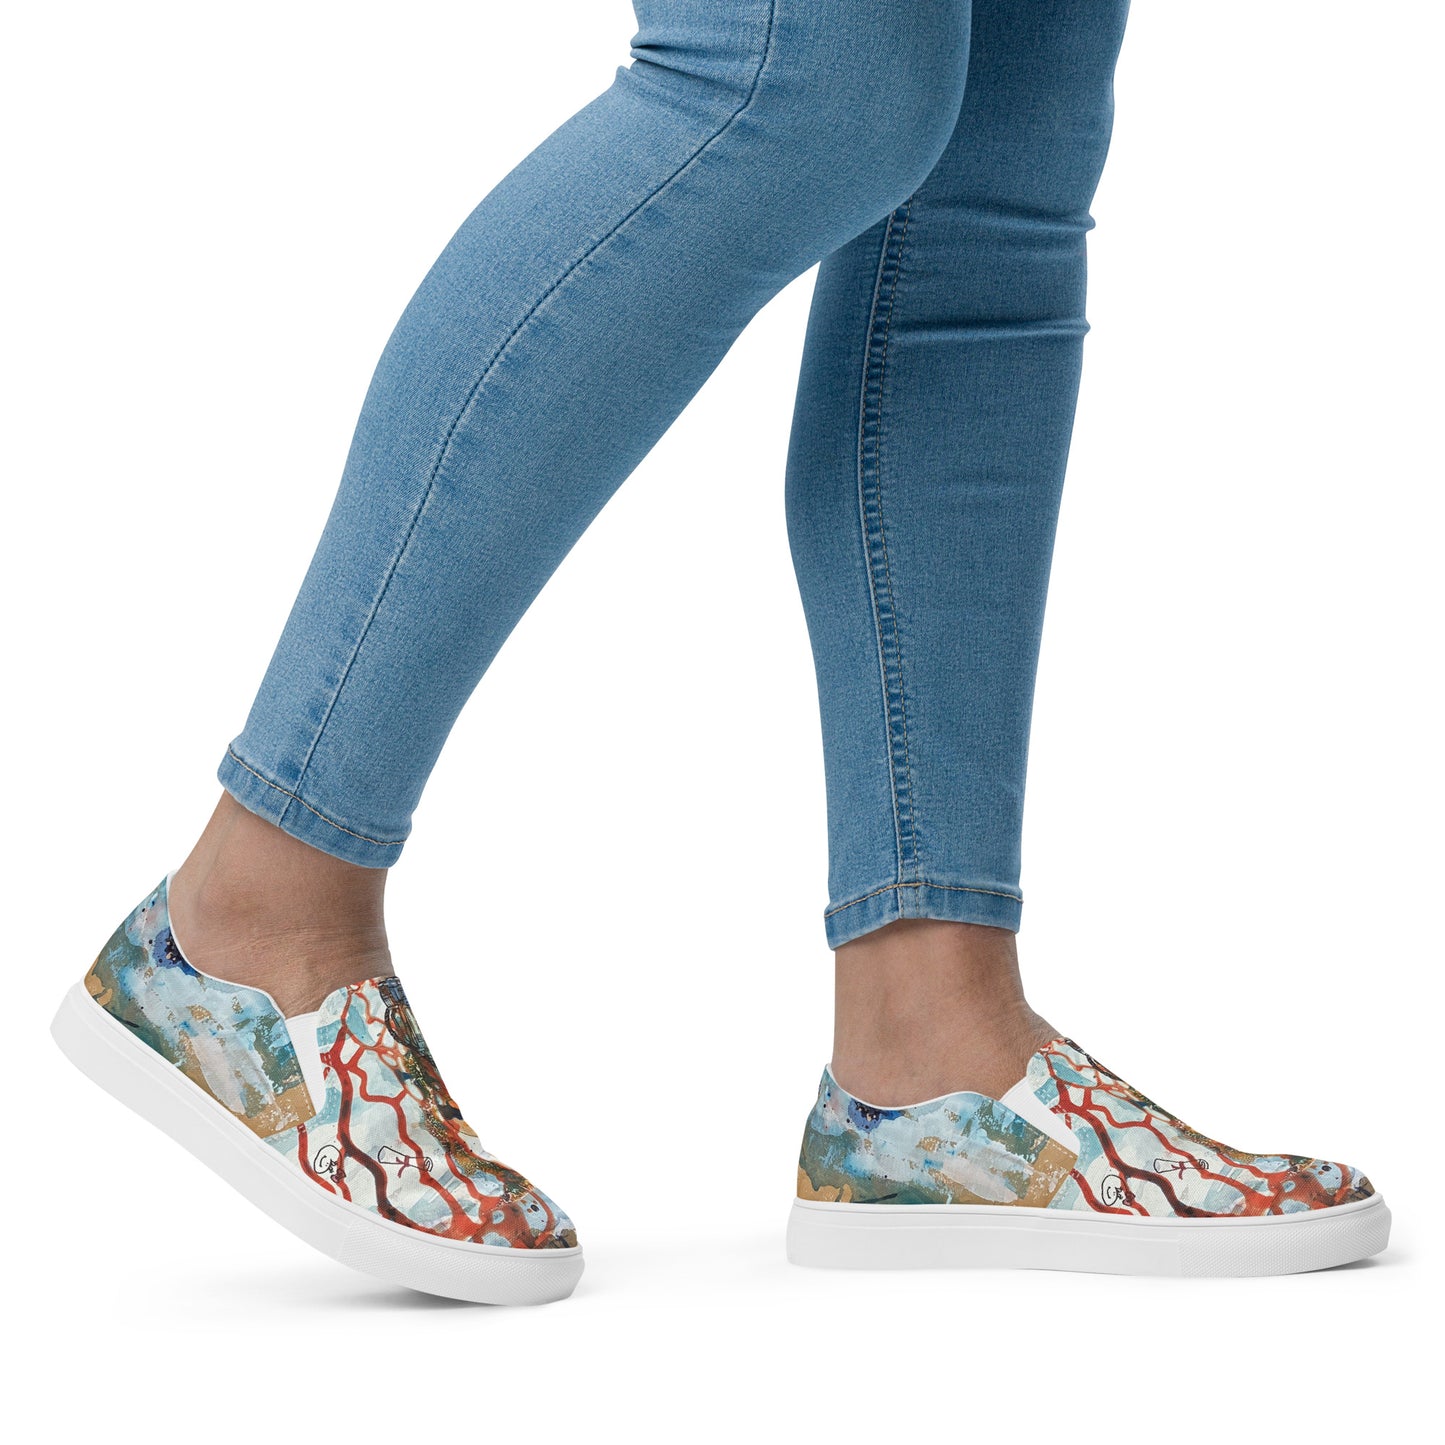 Chaussures slip-on en toile pour femme - Freedom